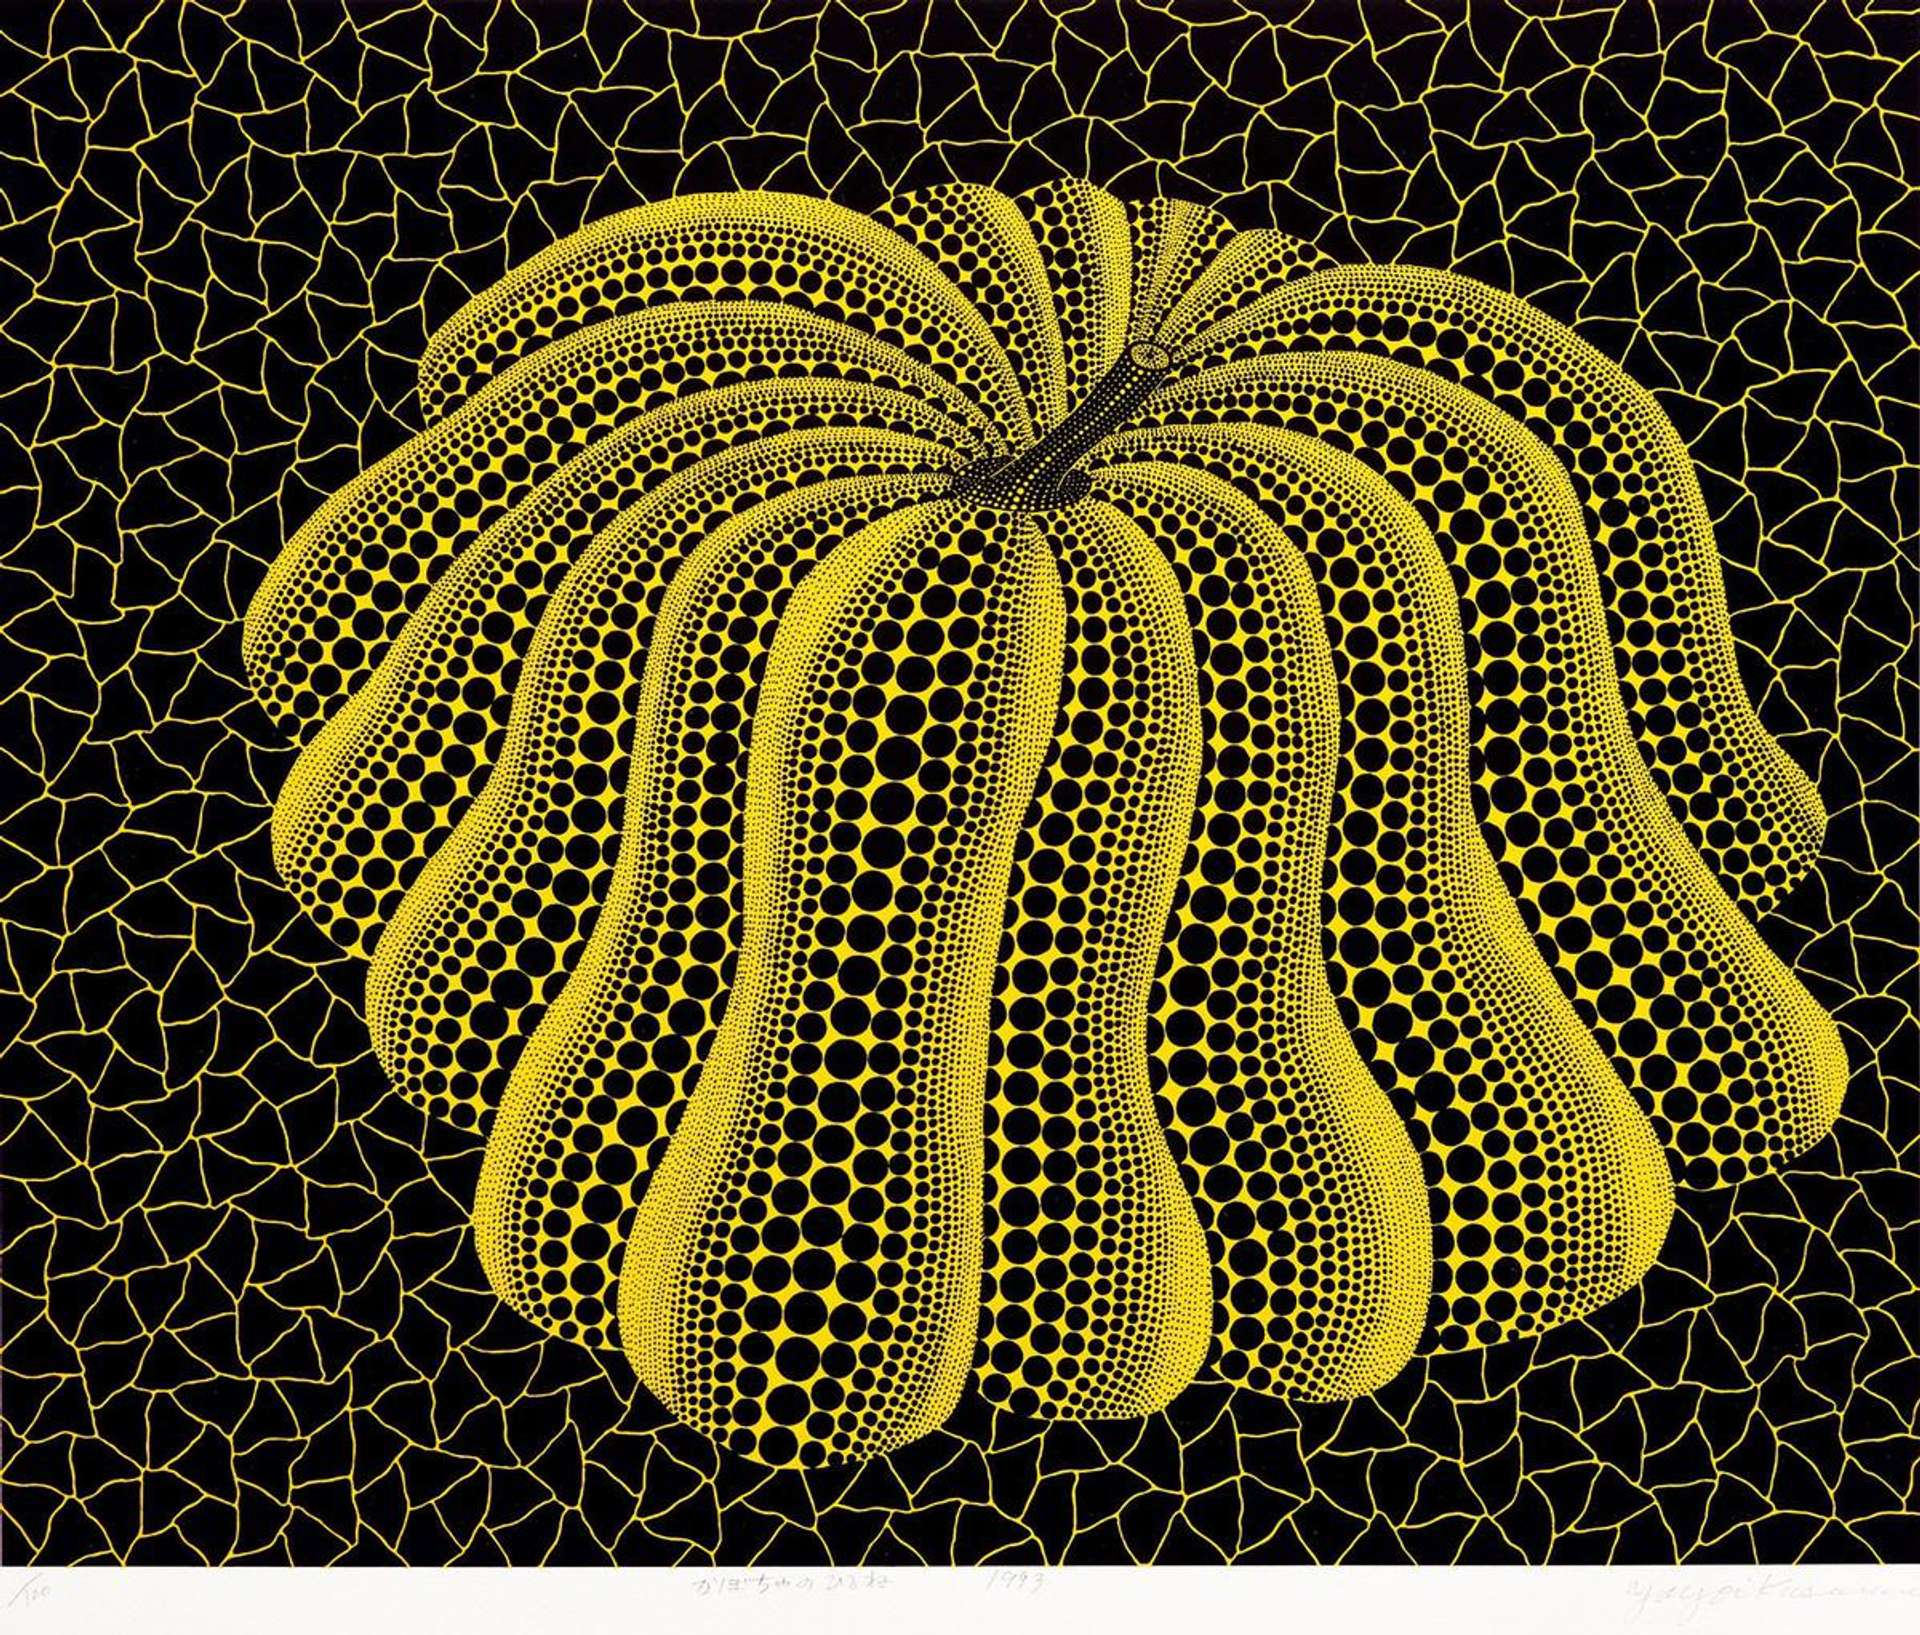 An image of one of Yayoi Kusama's pumpkins. The work is done in yellow and black, and the pumpkin is detailed by her signature polka-dots. The background looks like cracked or fragmented.